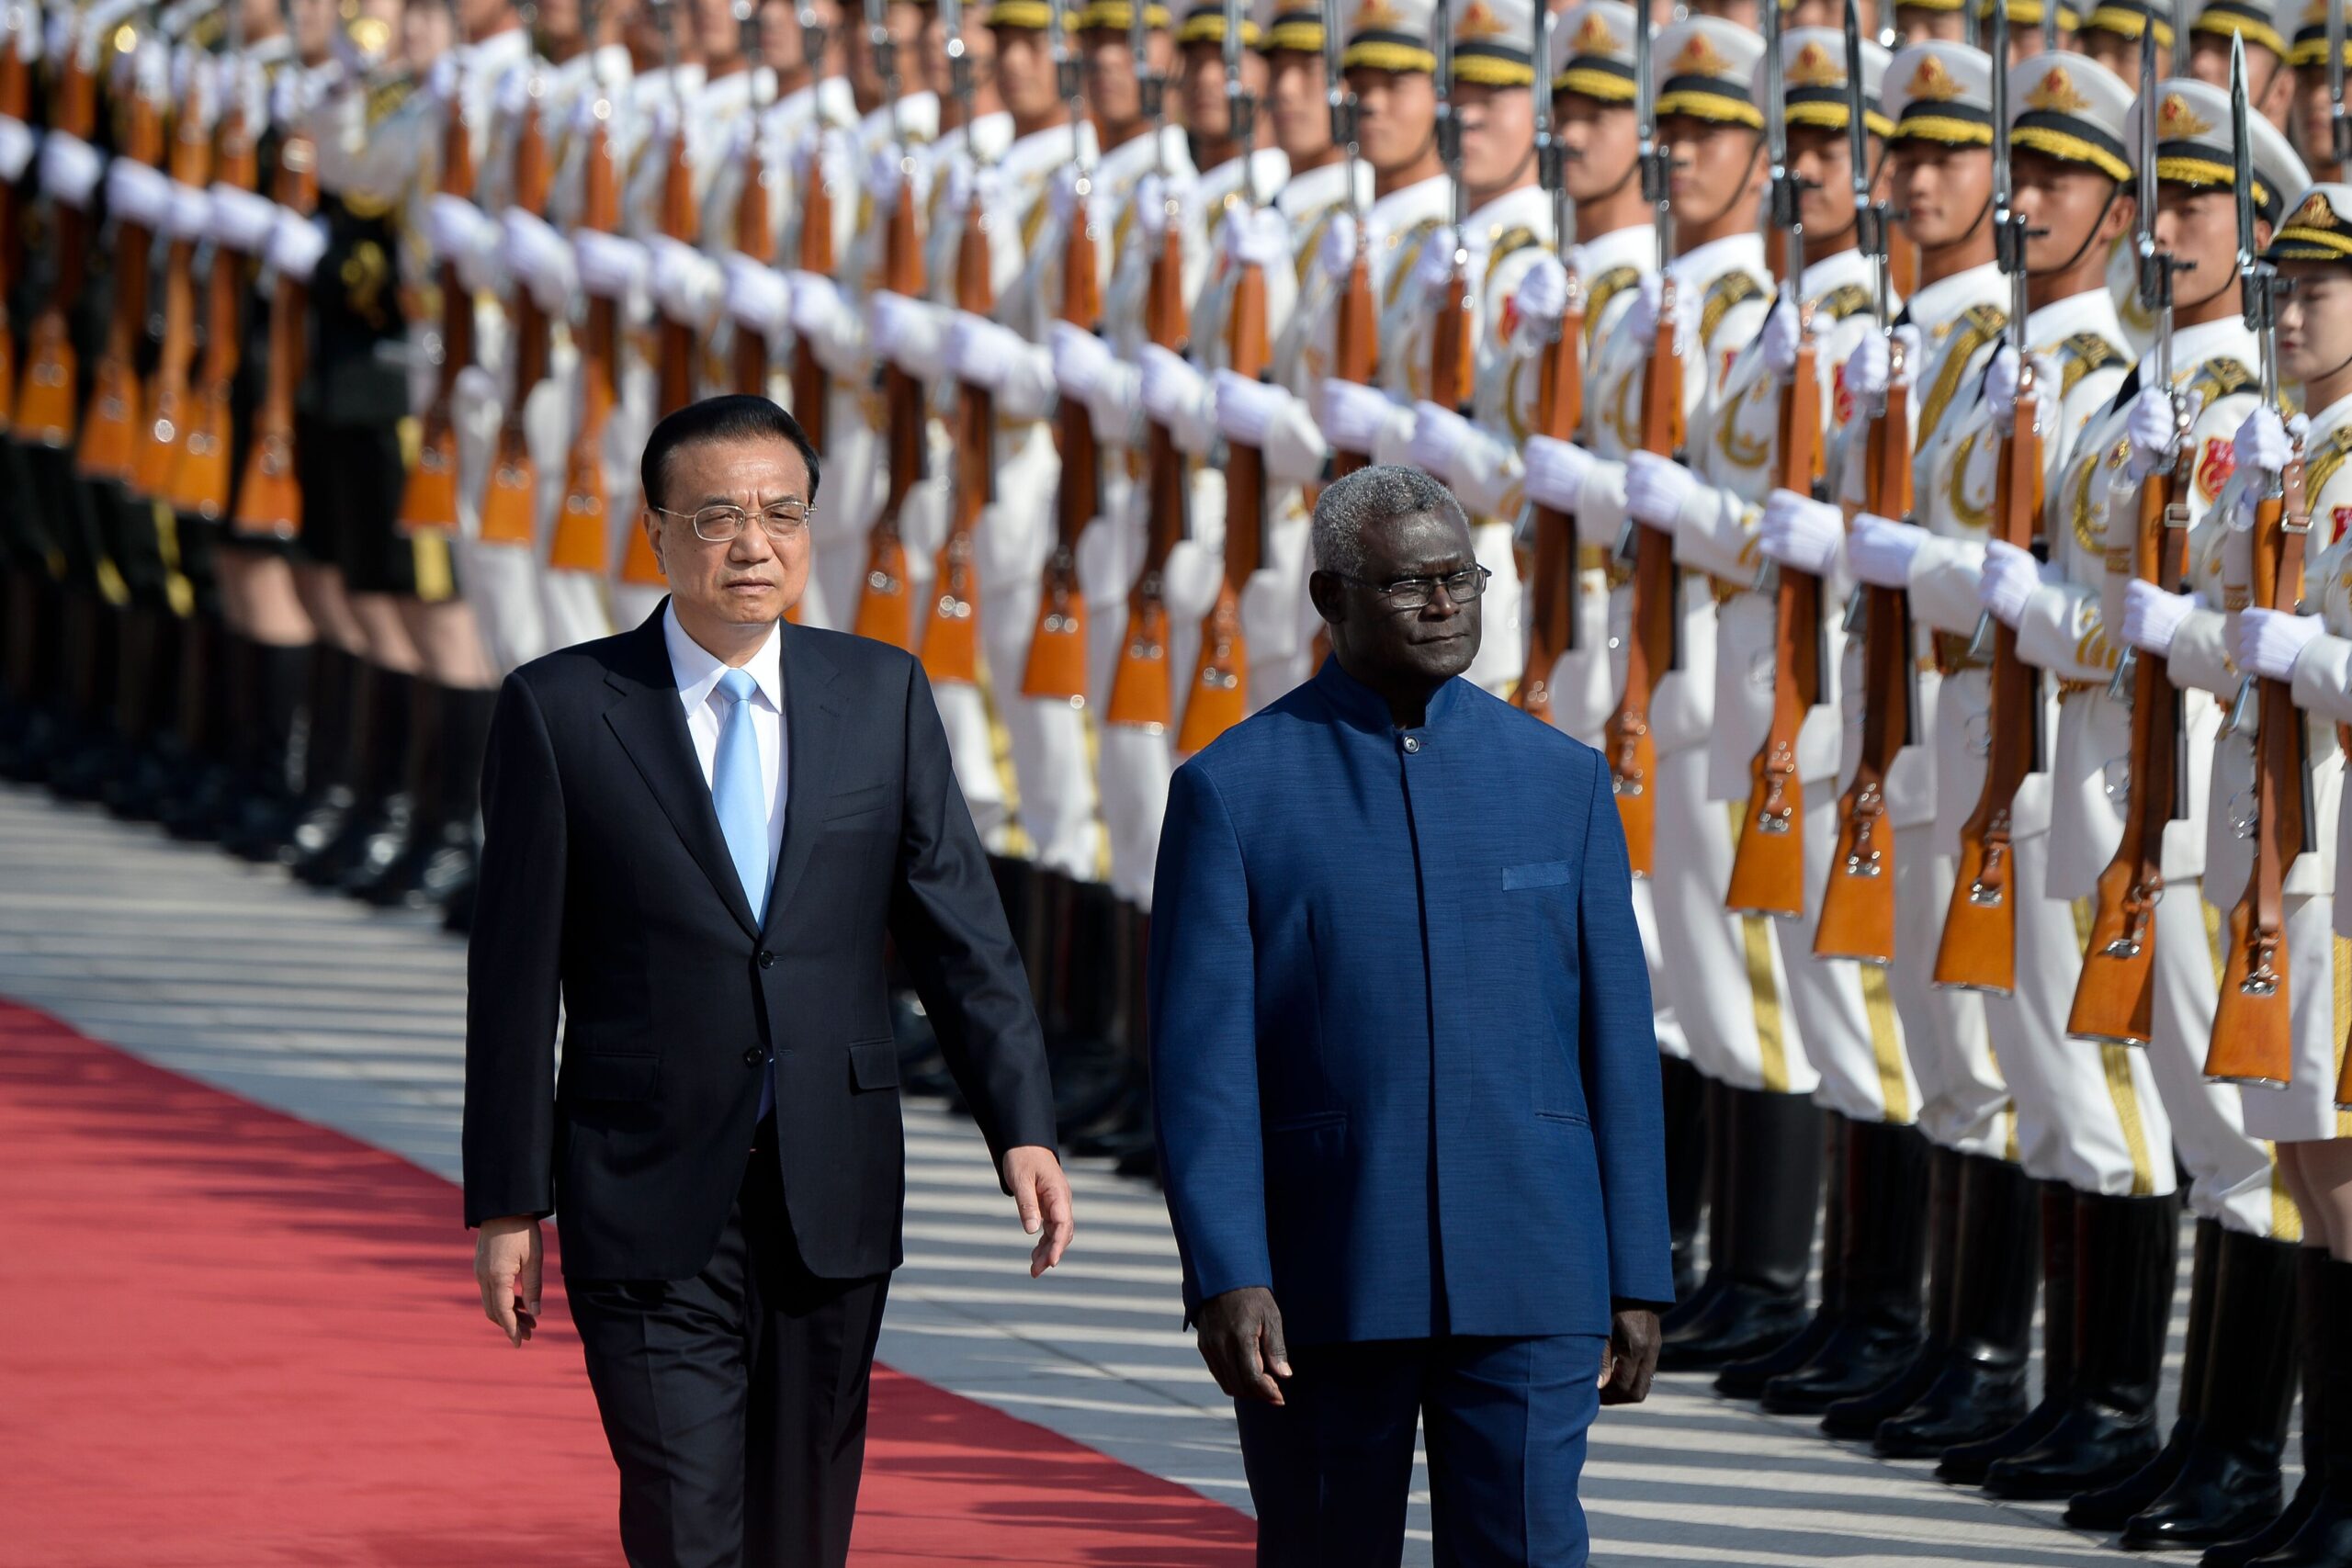 Solomon Islands Prime Minister Manasseh Sogavare and Chinese Premier Li Keqiang inspect honour guards during a welcome ceremony at the Great Hall of the People in Beijing